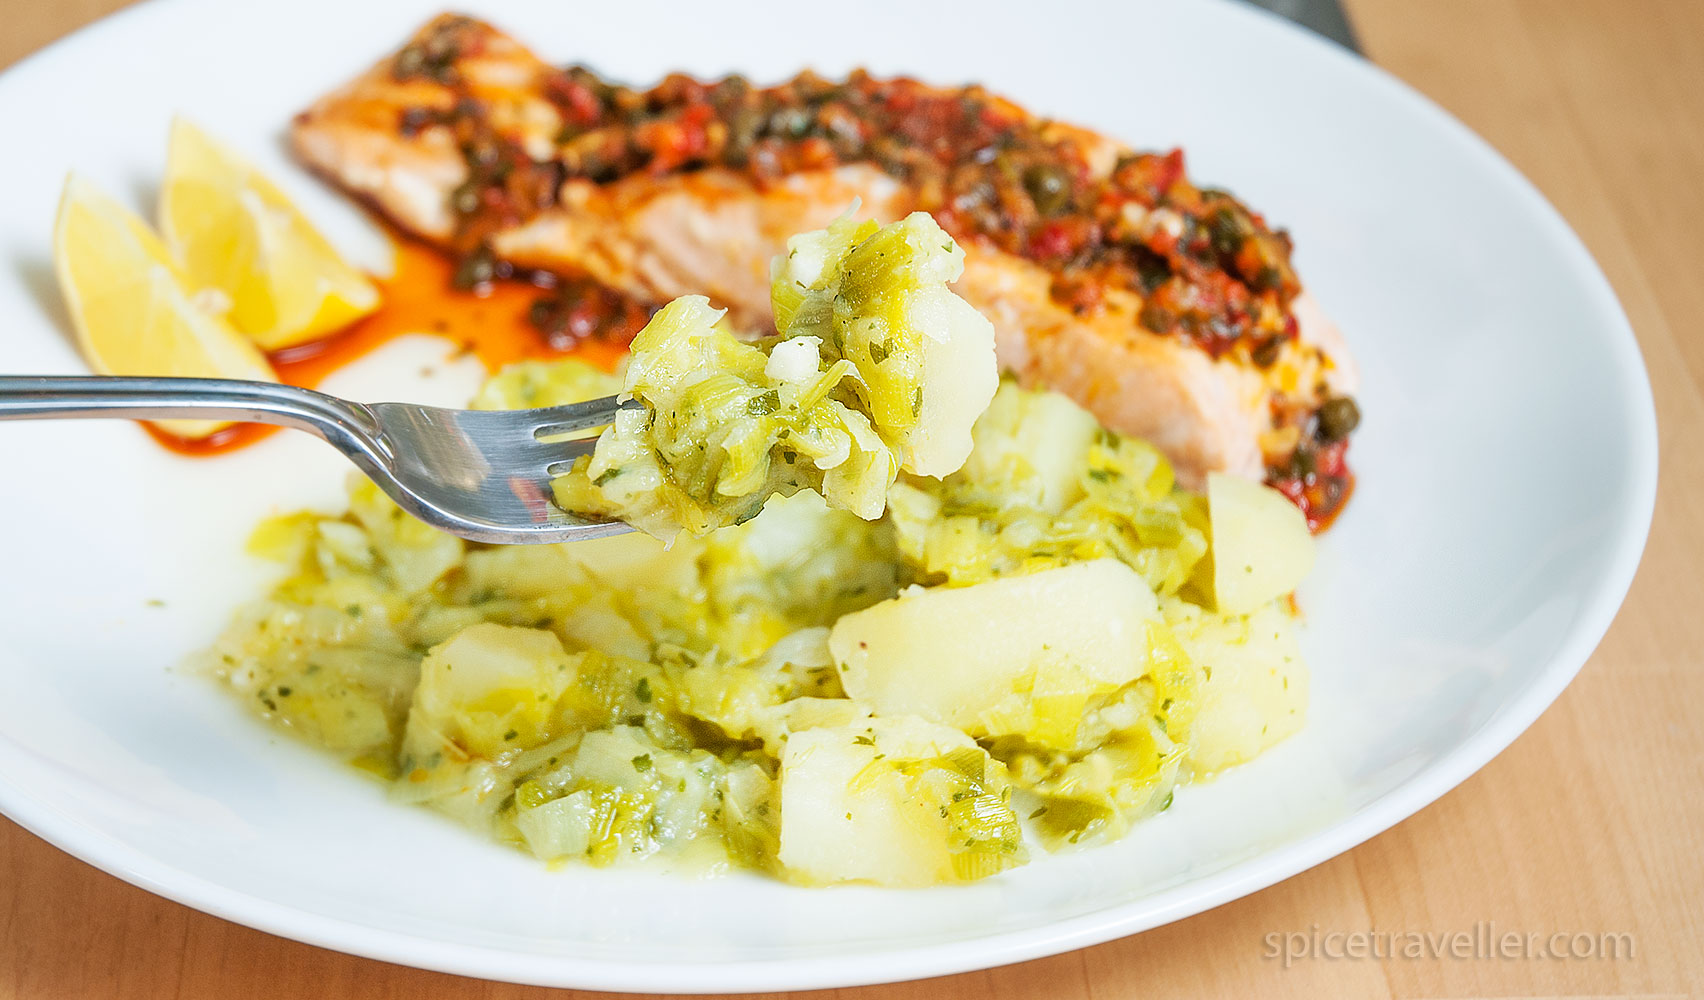 Simple and tasty Croatian leek and potato side dish, served with salmon